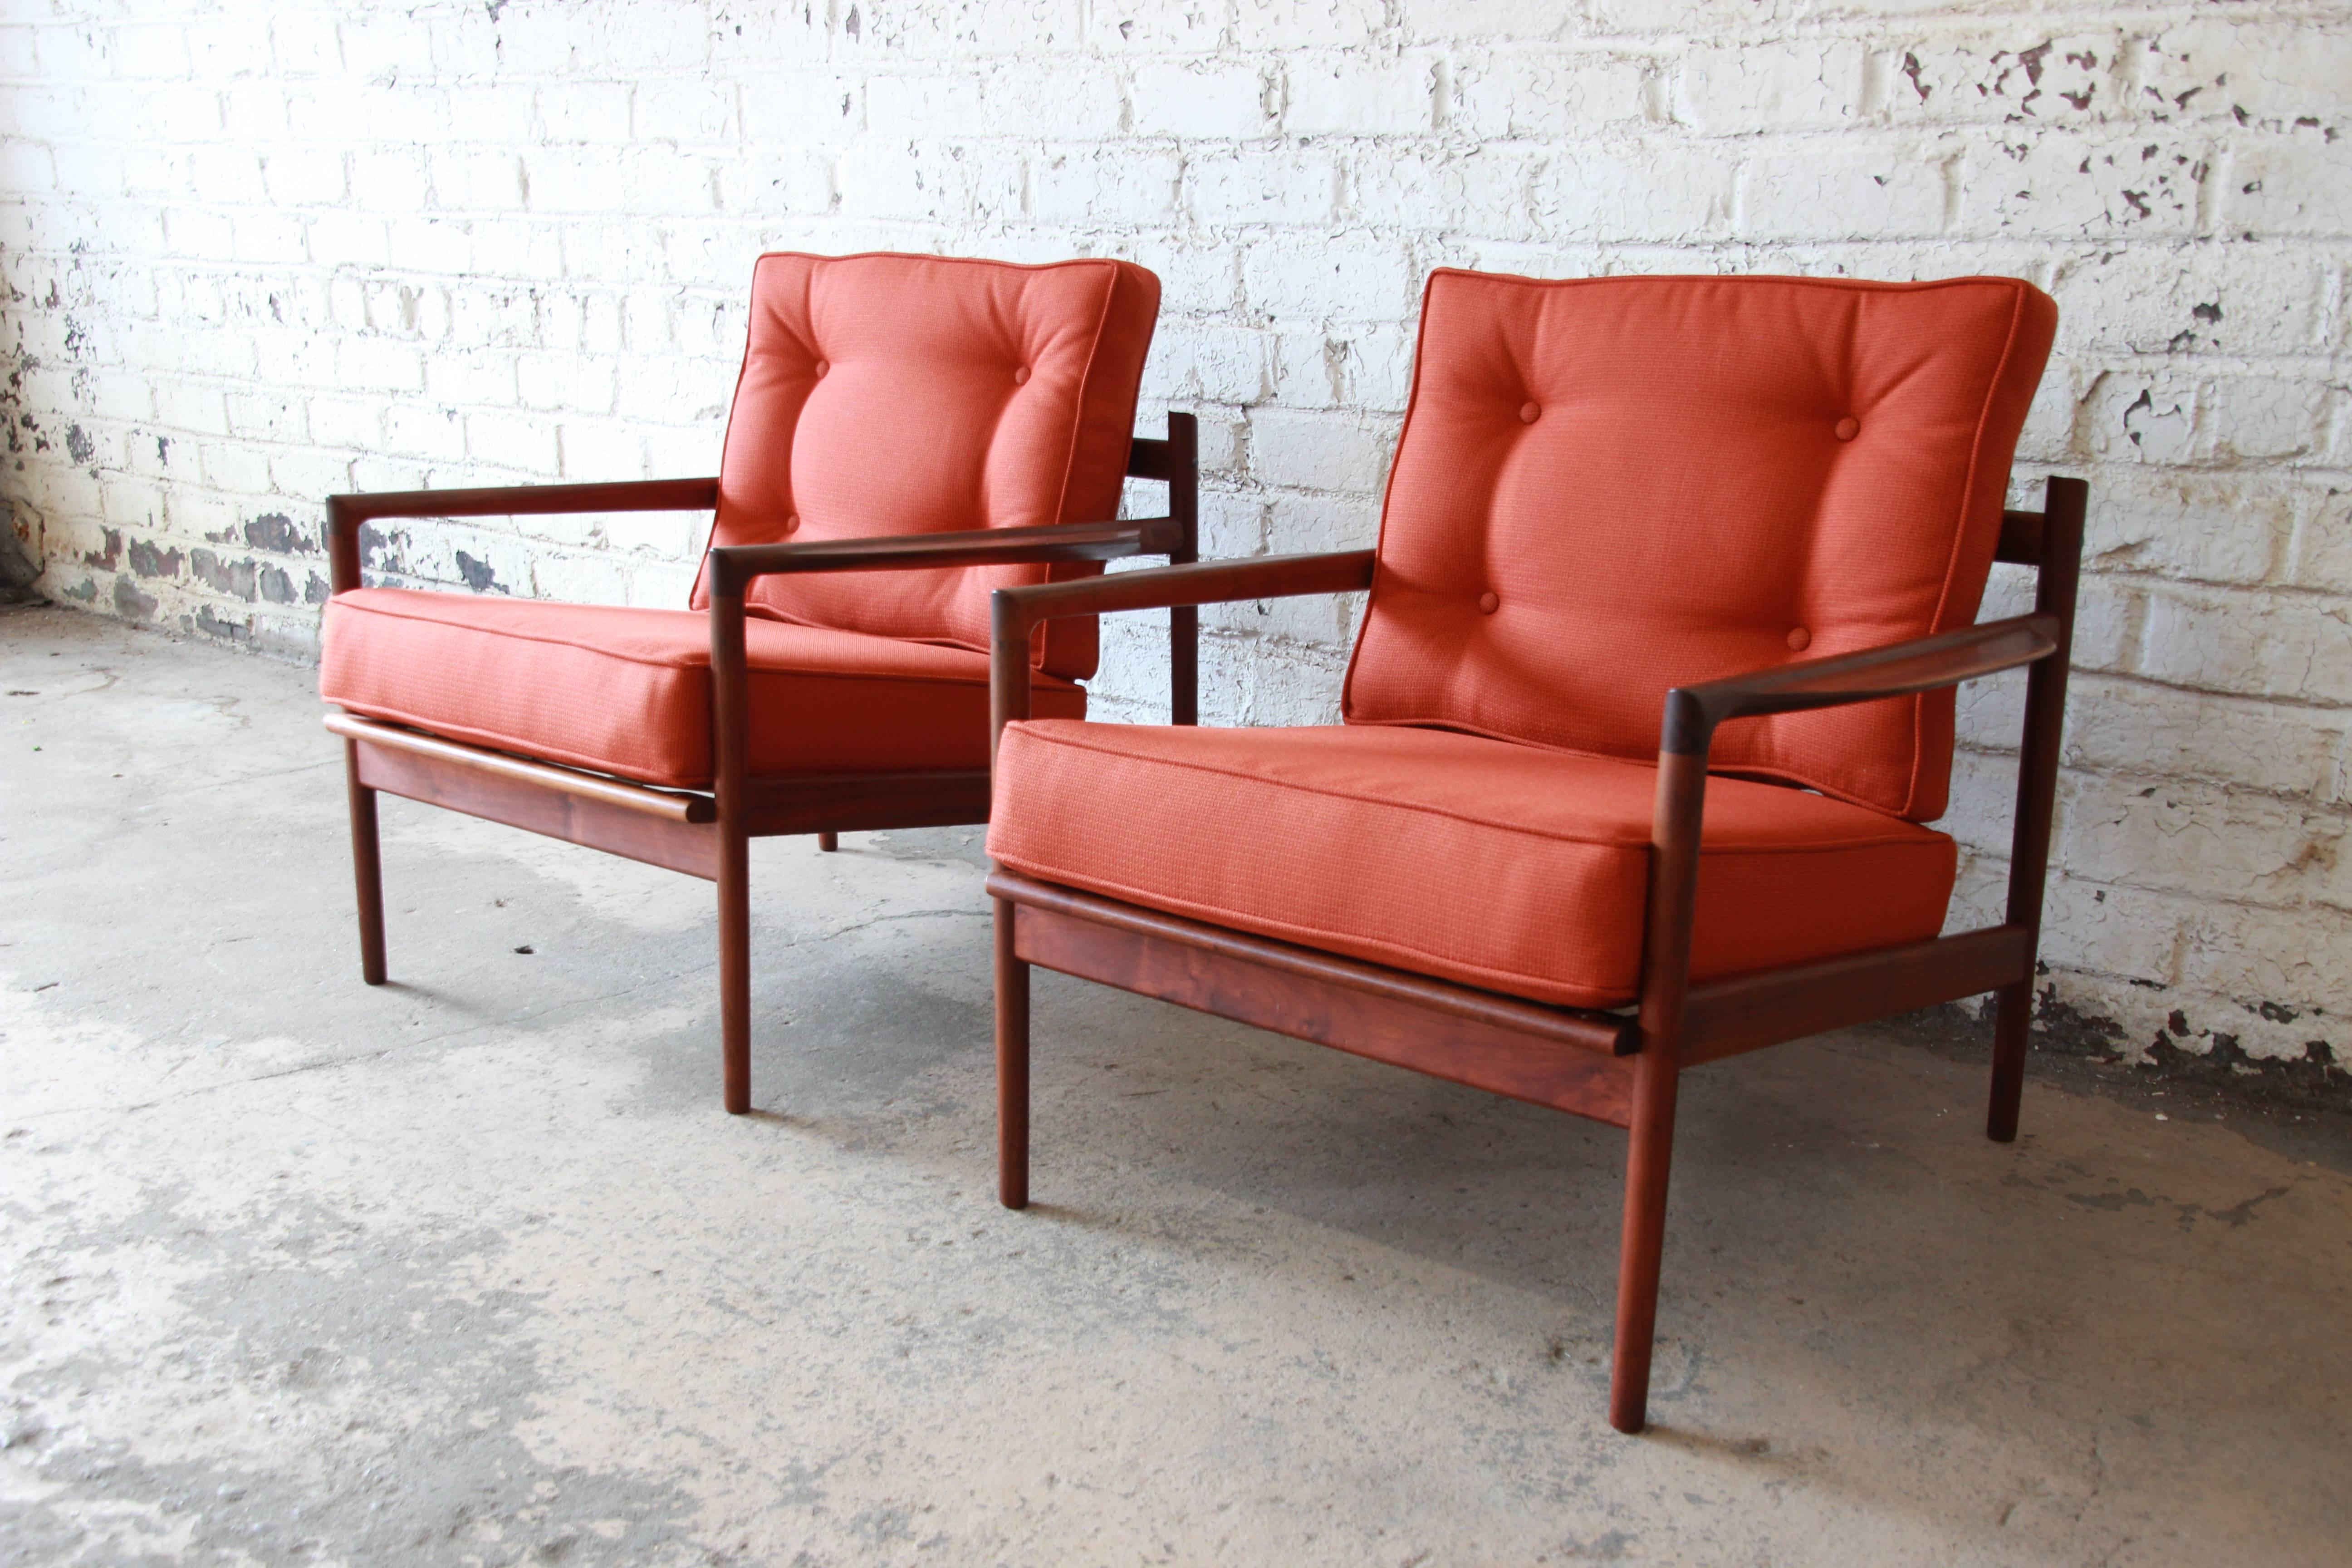 A stunning pair of Danish Modern picket back lounge chairs designed by Ib Kofod-Larsen for Selig. The chairs feature gorgeous walnut frames with a unique picket back design. They have recently been restored with new foam and designer Herman Miller